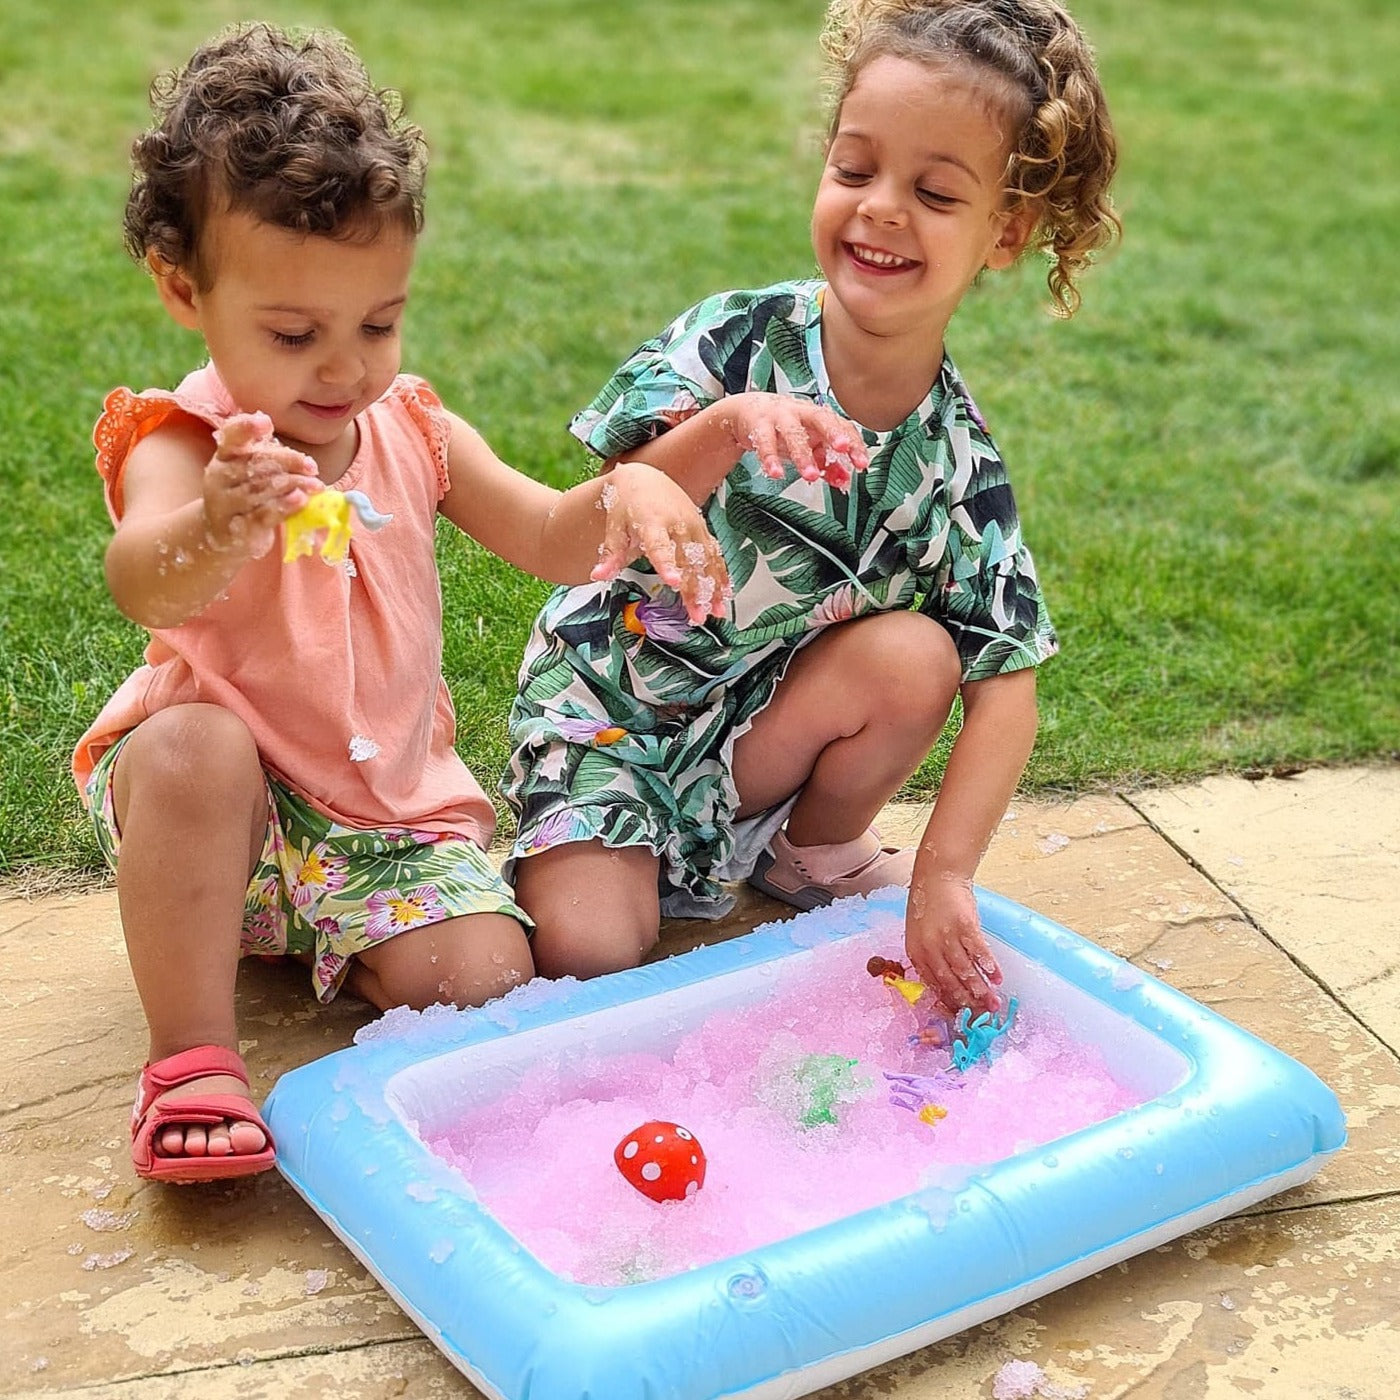 Inflatable Messy Play Tray, The Inflatable Messy Play Tray is an economical solution that makes multiple sensory stations easy to set up, clean and stow away when not in use. Use it on the go as a therapist or take it on holiday with the kids for portable sensory fun, this Inflatable Messy Play Tray folds away easily for storage when not in use and takes seconds to blow up for the next sensory play session. Inflatable Play Tray Tabletop inflatable sensory play tray that makes messy time less messy! Can be u